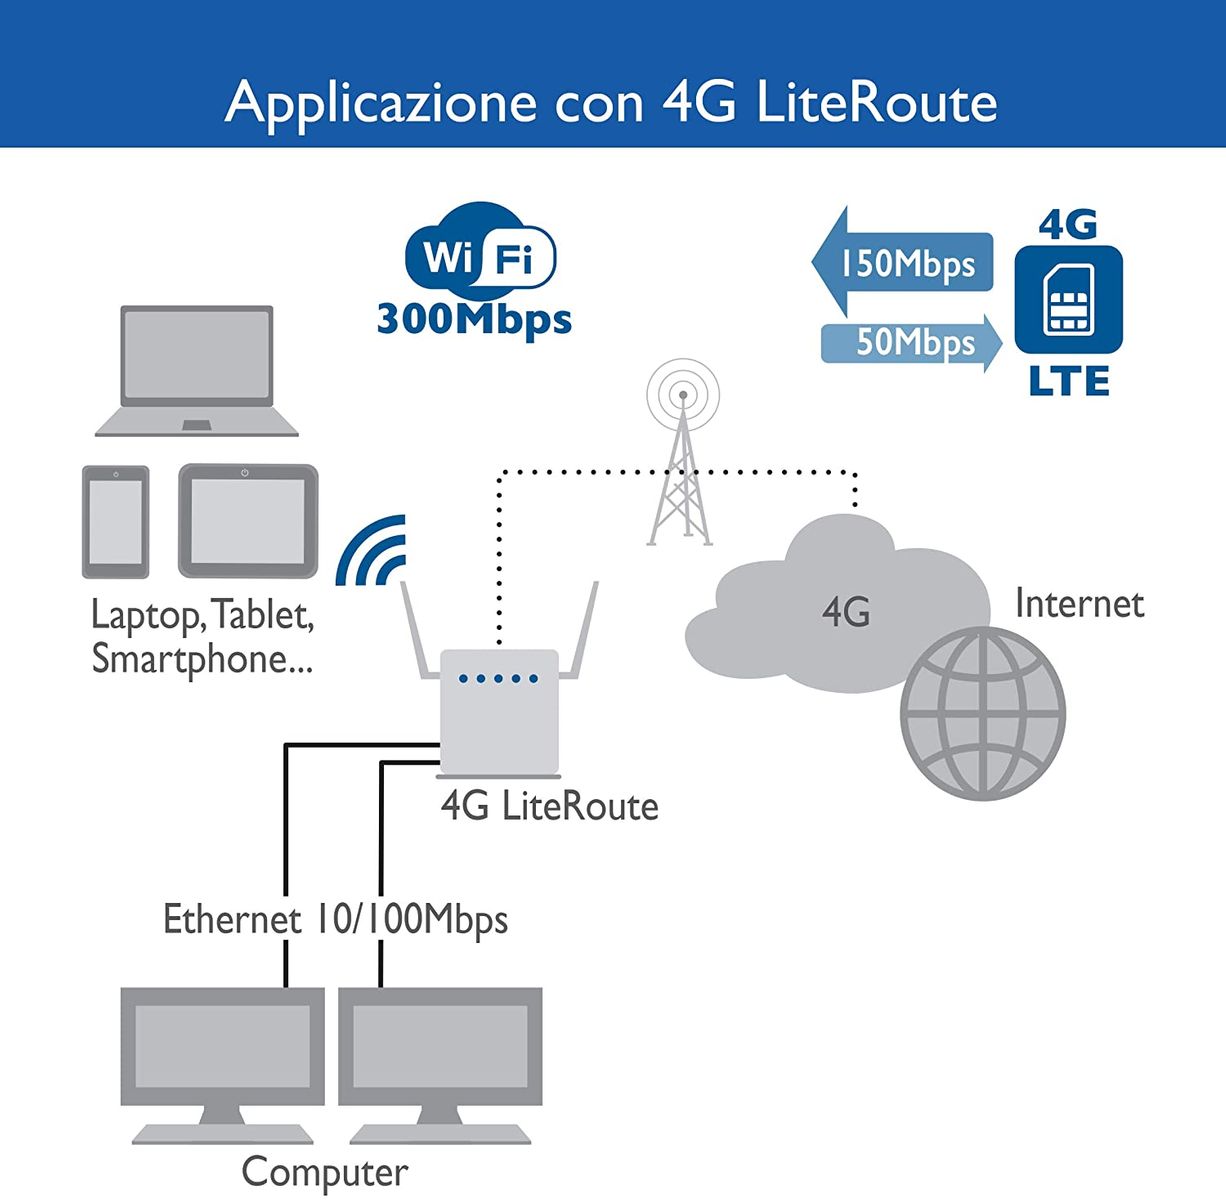 Digicom 4G LiteRoute. LTE Cat4 router (150Mbps download and 50Mbps Upload 4G). 2 10/100 LAN ports. Wi-Fi easy with WPS and up to 300Mbps White